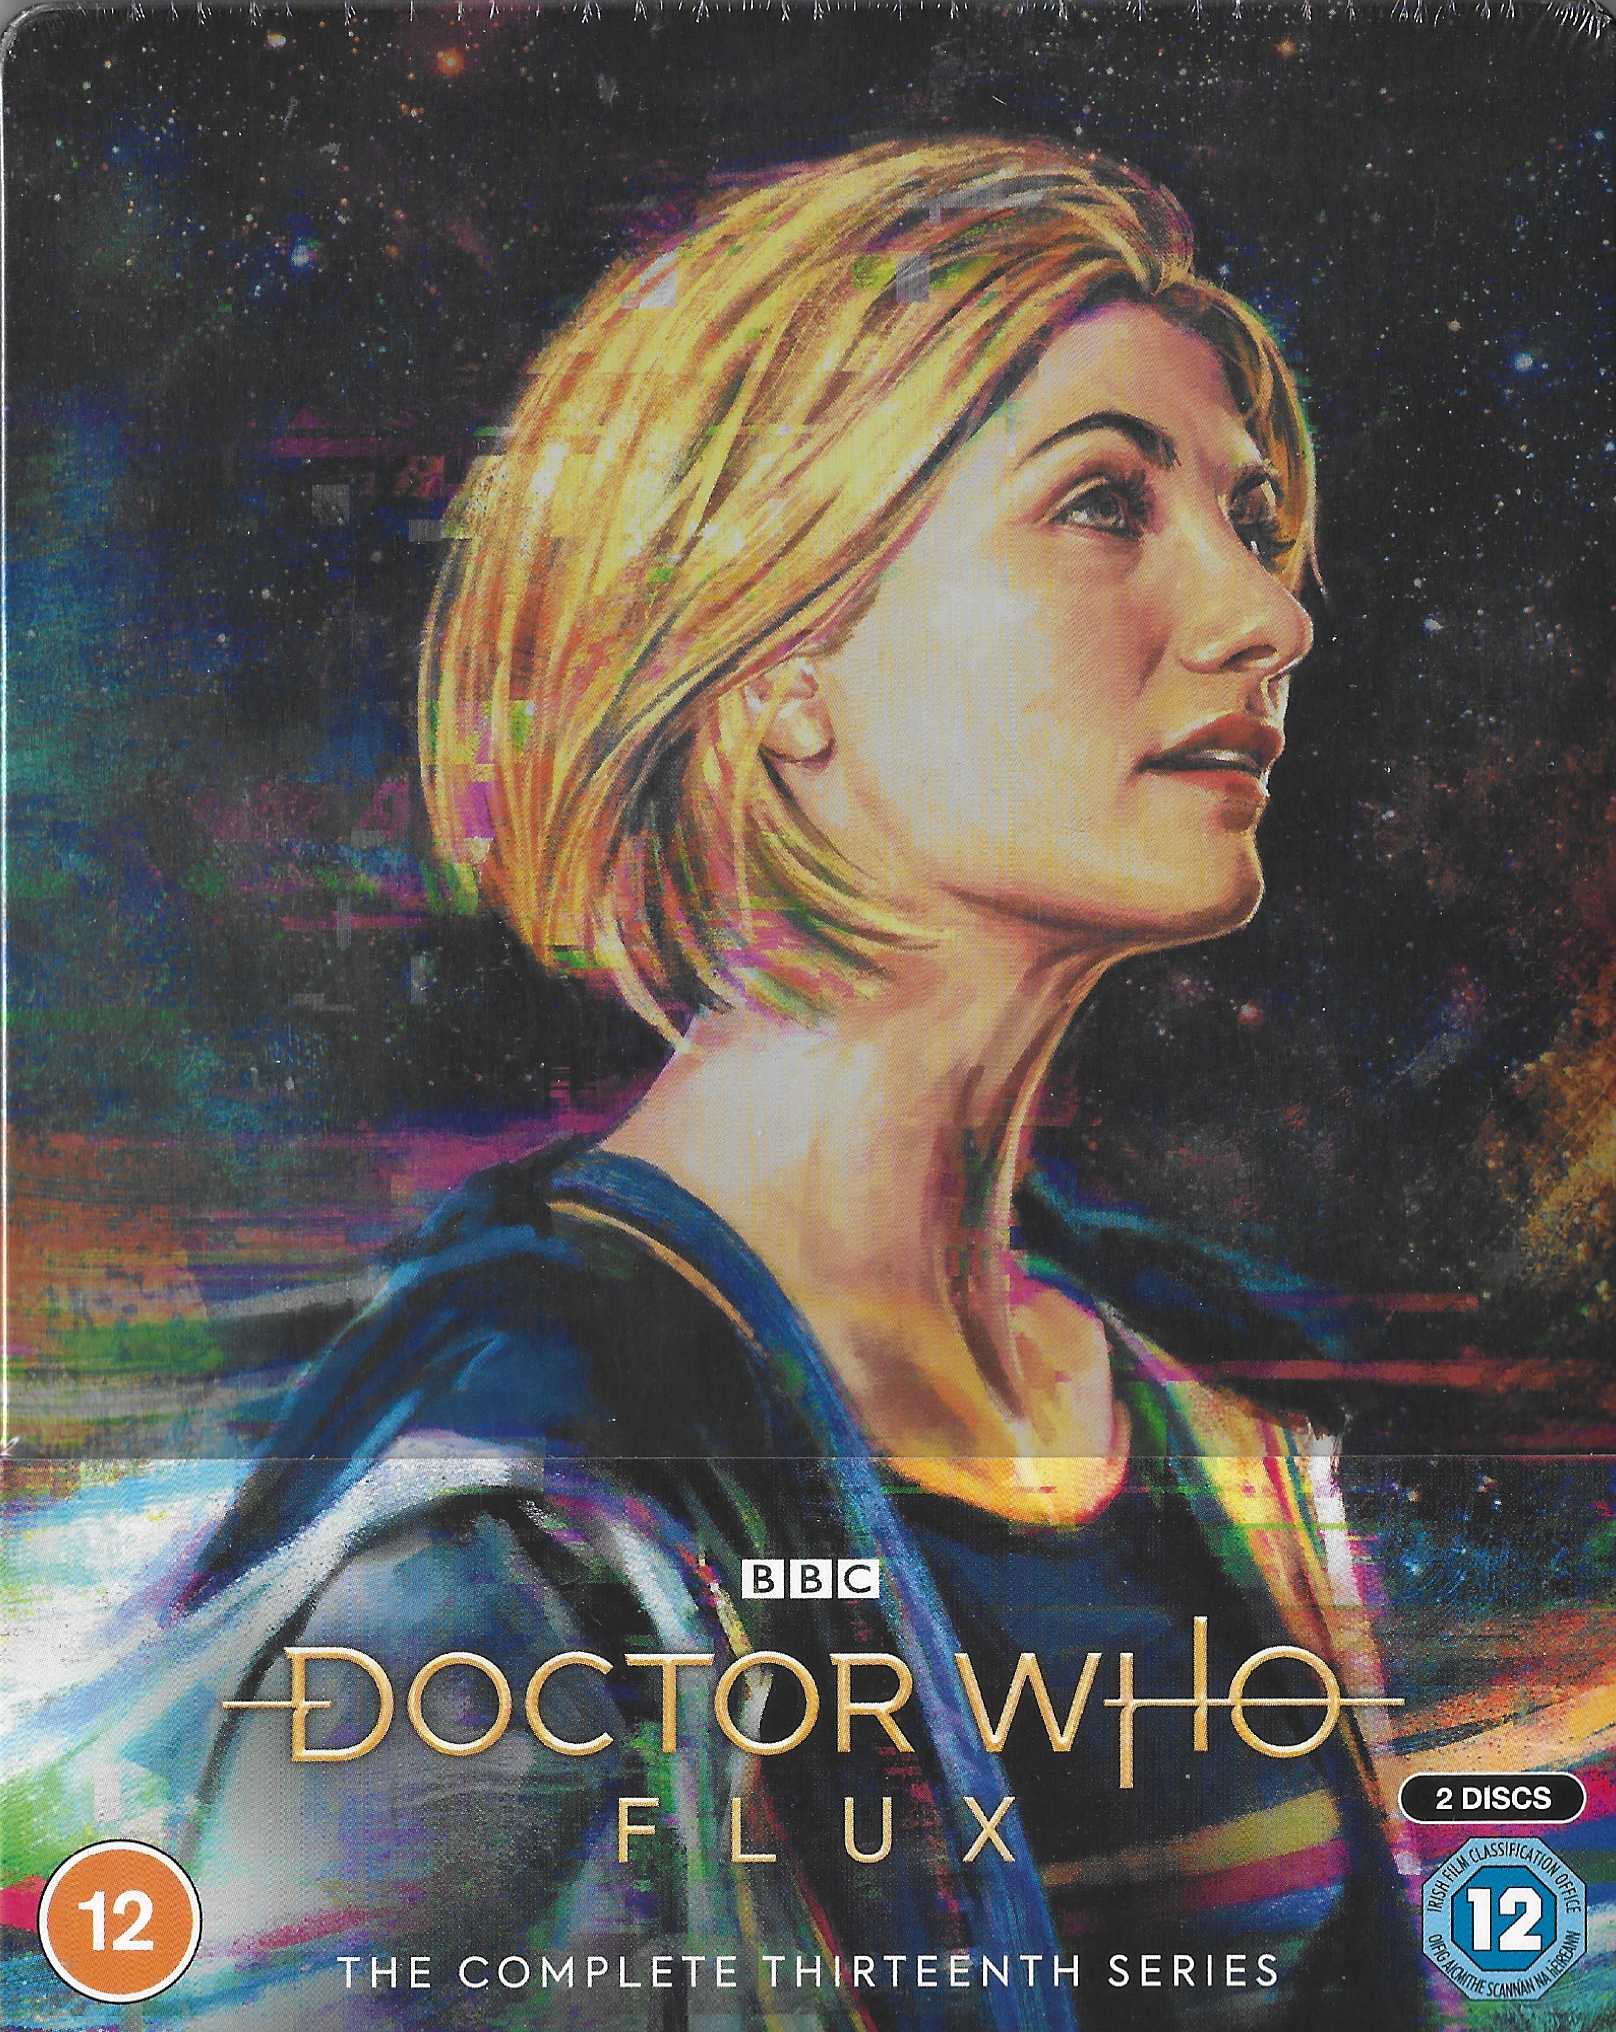 Picture of BBCBD 0554 Doctor Who - Flux by artist Various from the BBC records and Tapes library